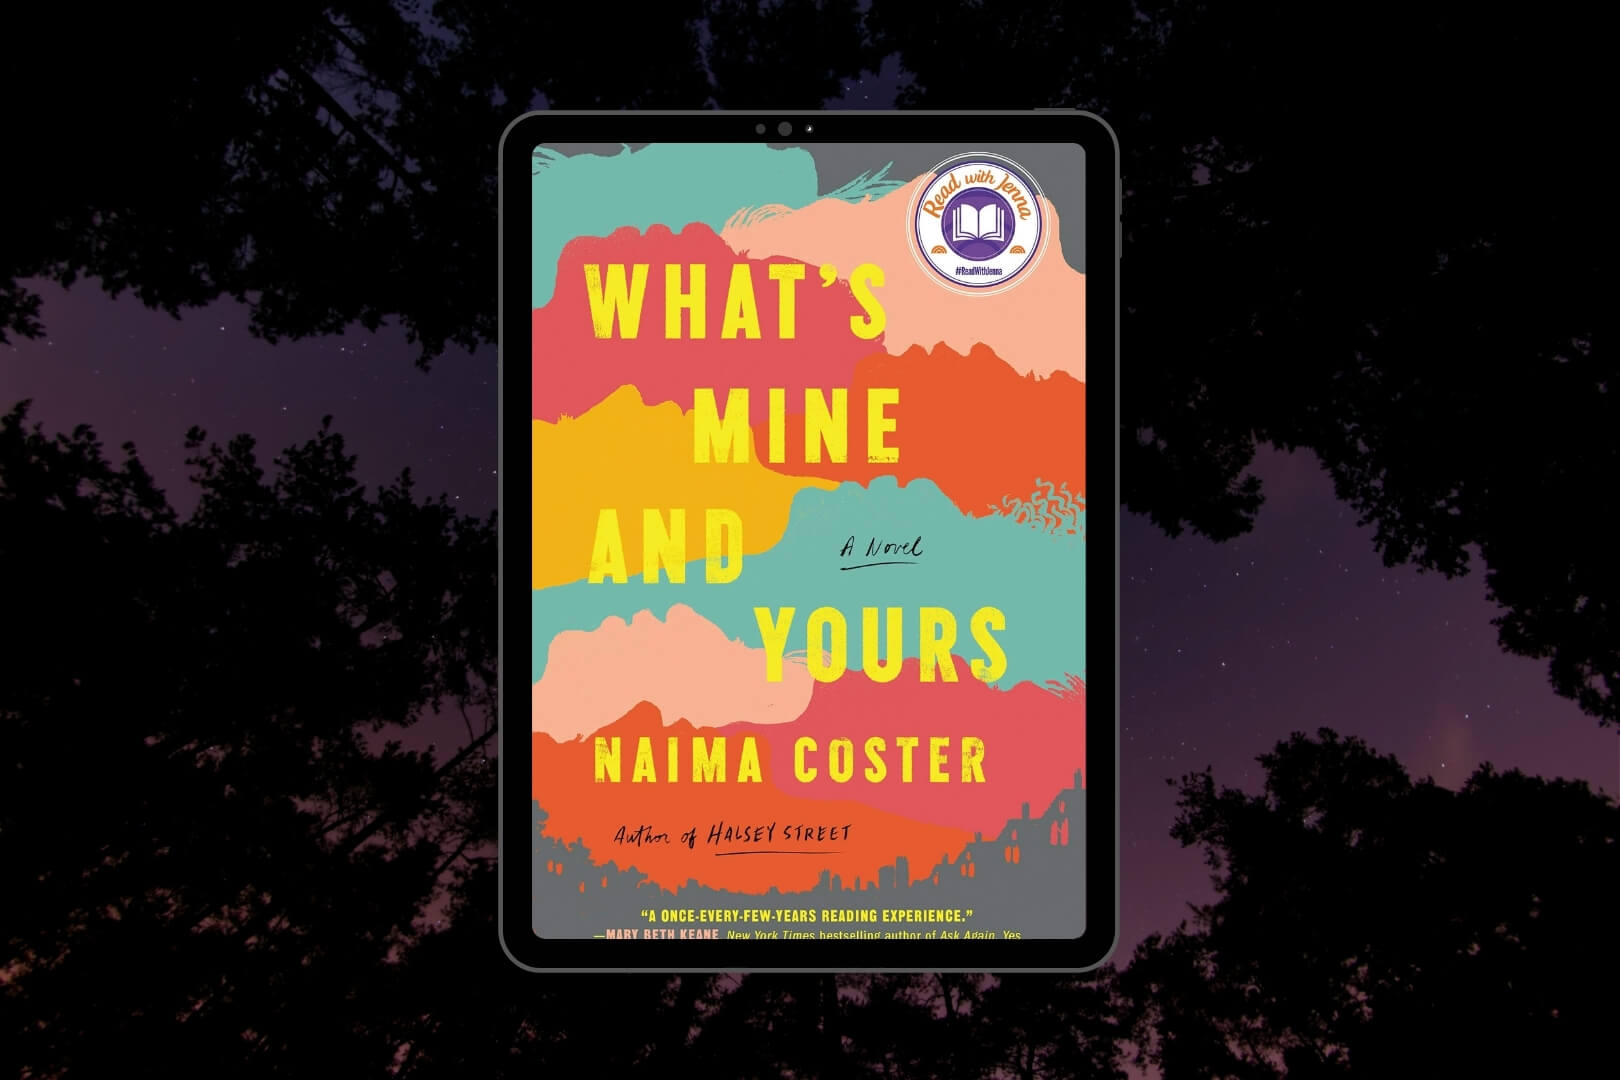 Book Club Questions for What’s Mine and Yours by Naima Coster